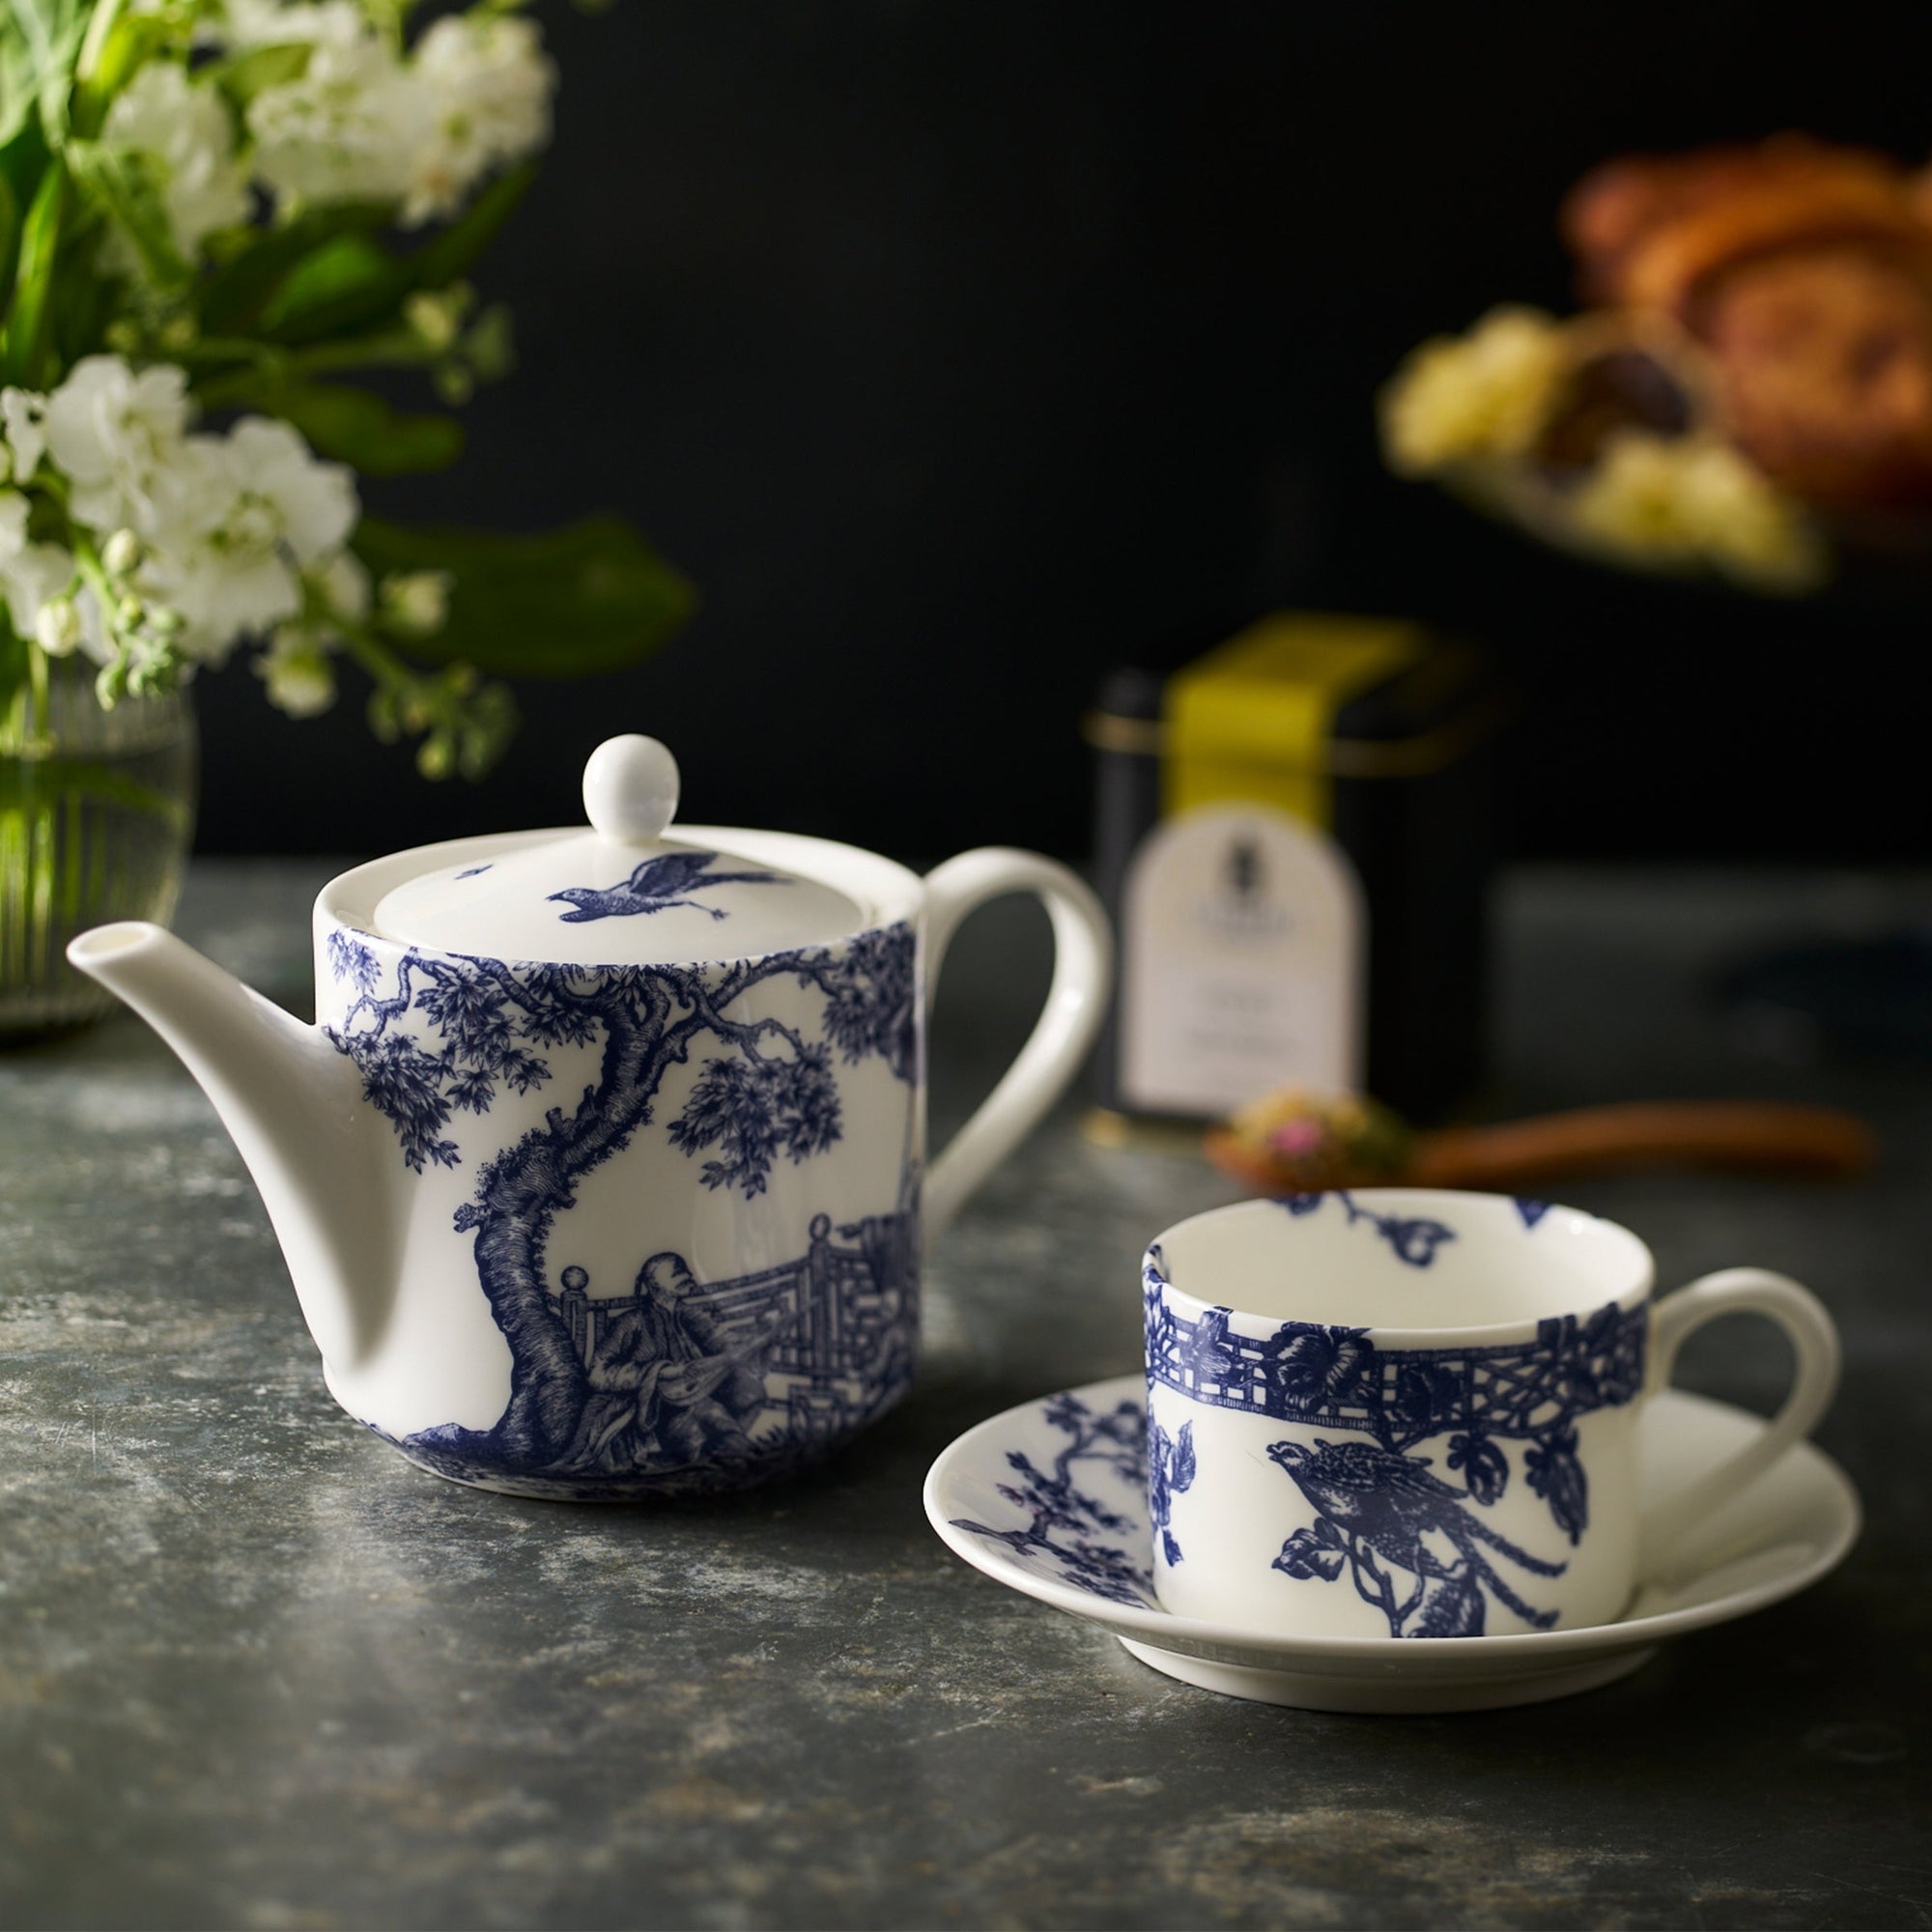 Chinoiserie Toile Bone China Teacup and Saucer Set of 2 from Caskata.